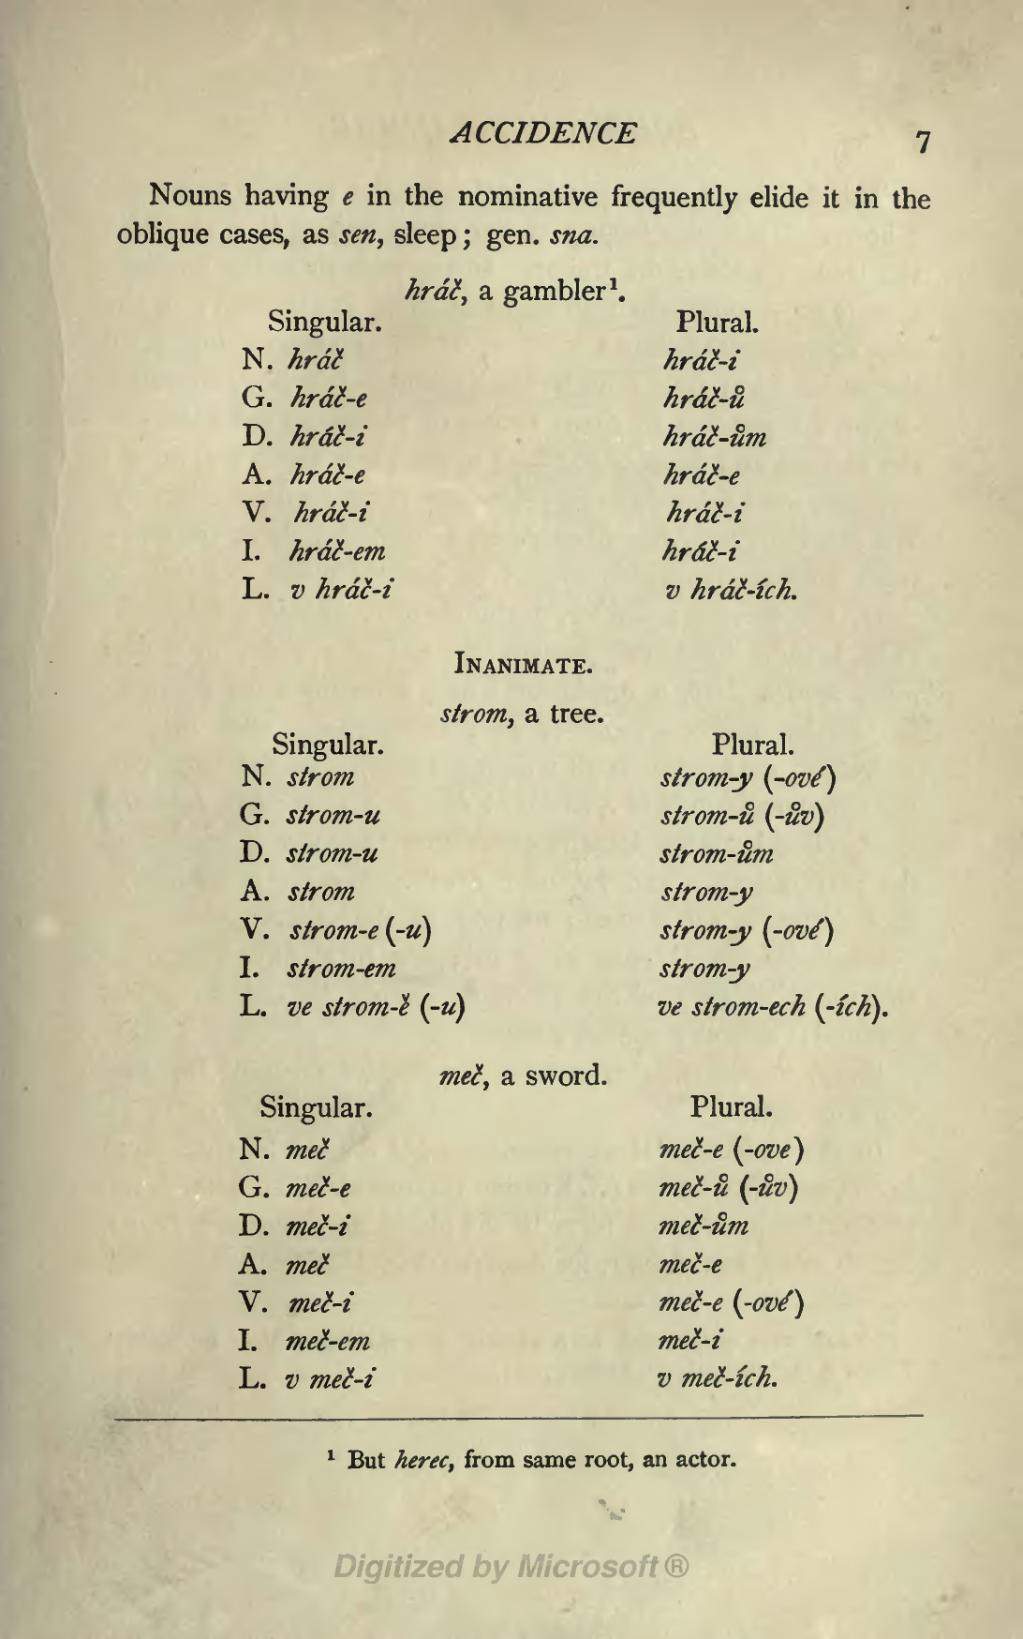 Page A Grammar Of The Bohemian Or Cech Language Djvu 29 Wikisource The Free Online Library